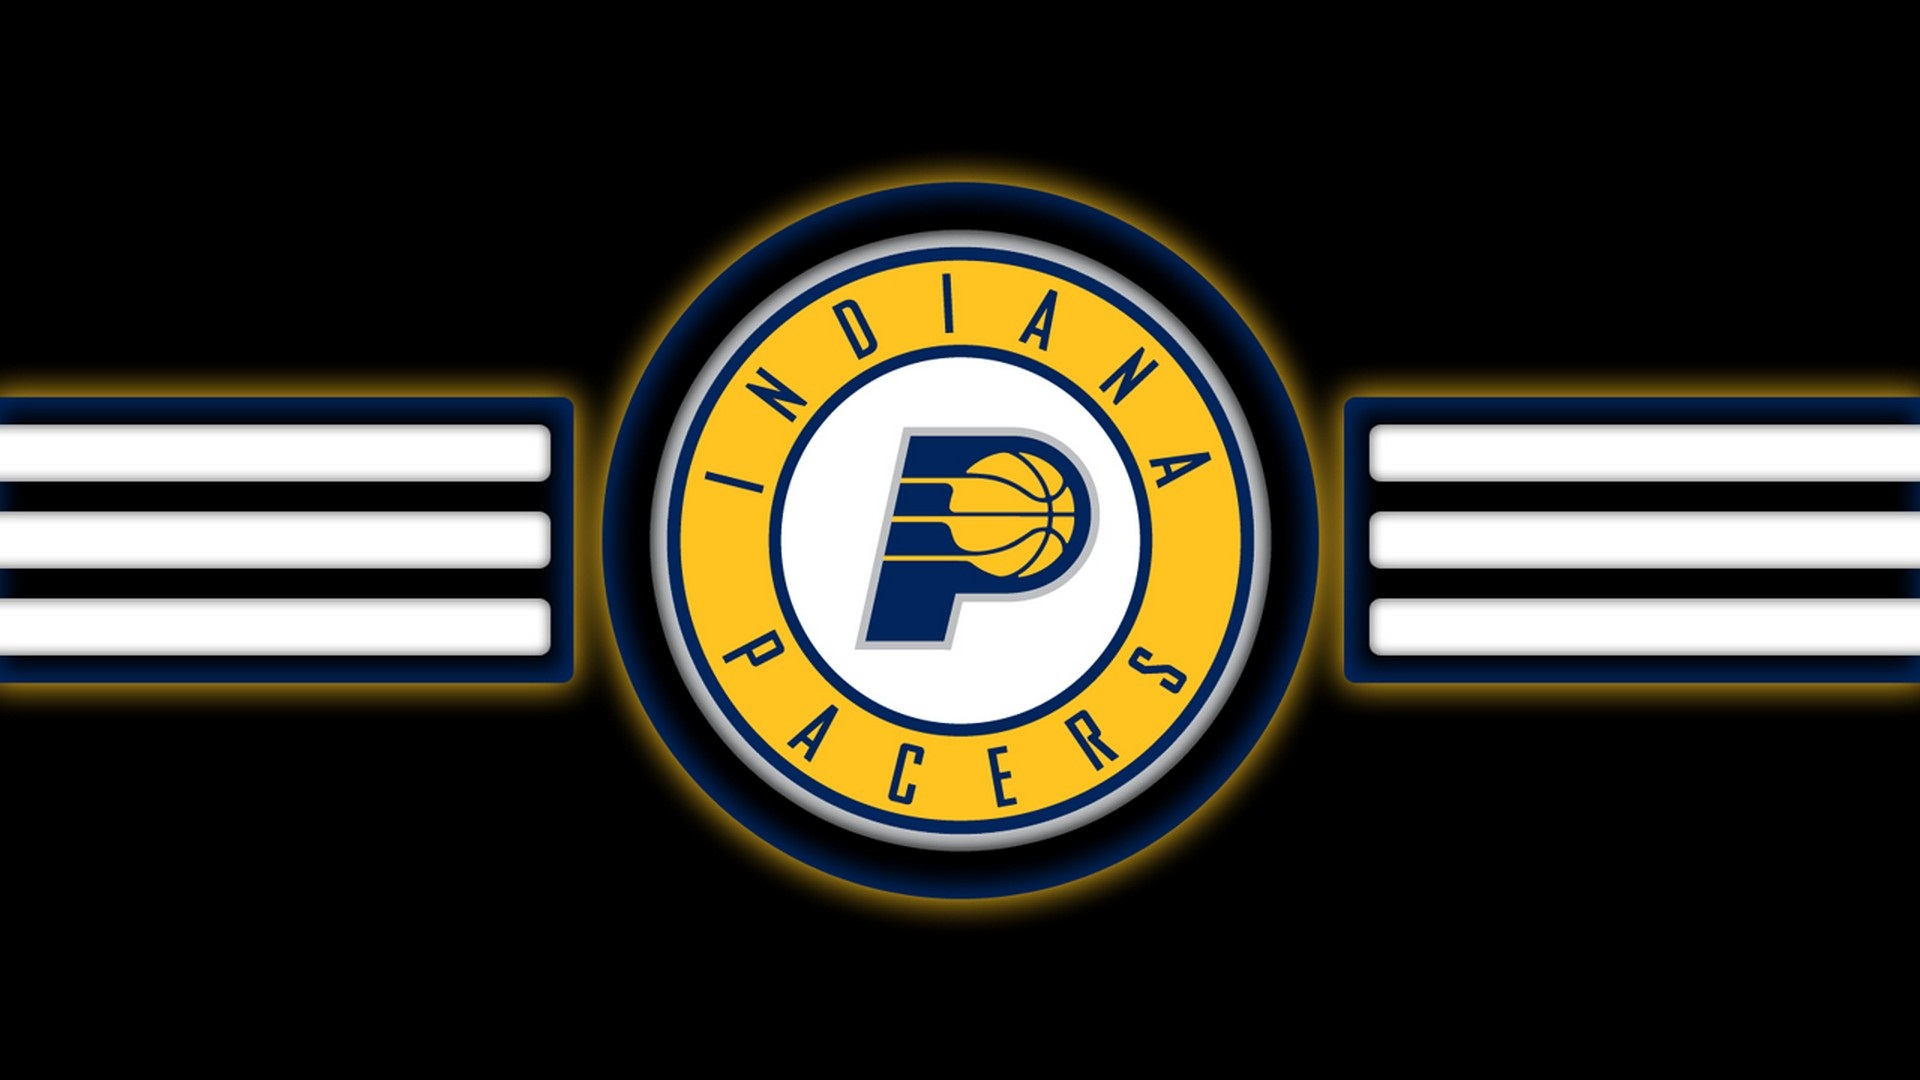 Indiana Pacers Wallpaper Hd - Indiana Pacer - HD Wallpaper 